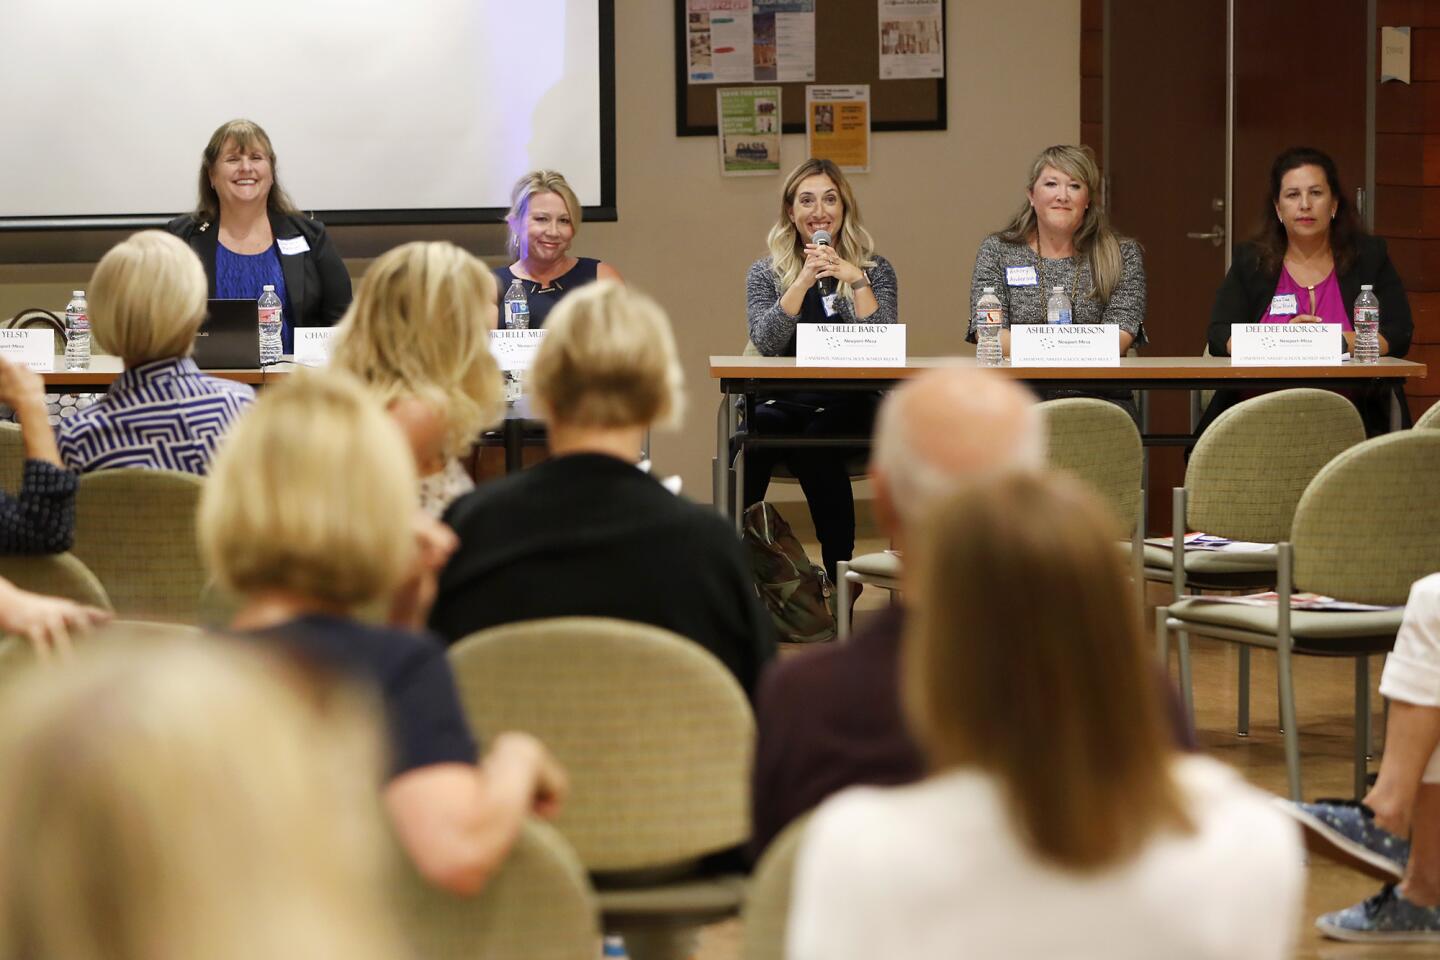 Candidates for the Newport-Mesa Unified School District board of trustees take questions during a forum Tuesday presented by the Newport Beach Women's Democratic Club at the Oasis Senior Center in Corona del Mar. Pictured from left are Charlene Metoyer, Michelle Murphy, Michelle Barto, Ashley Anderson and Diane "Dee Dee" RuoRock.